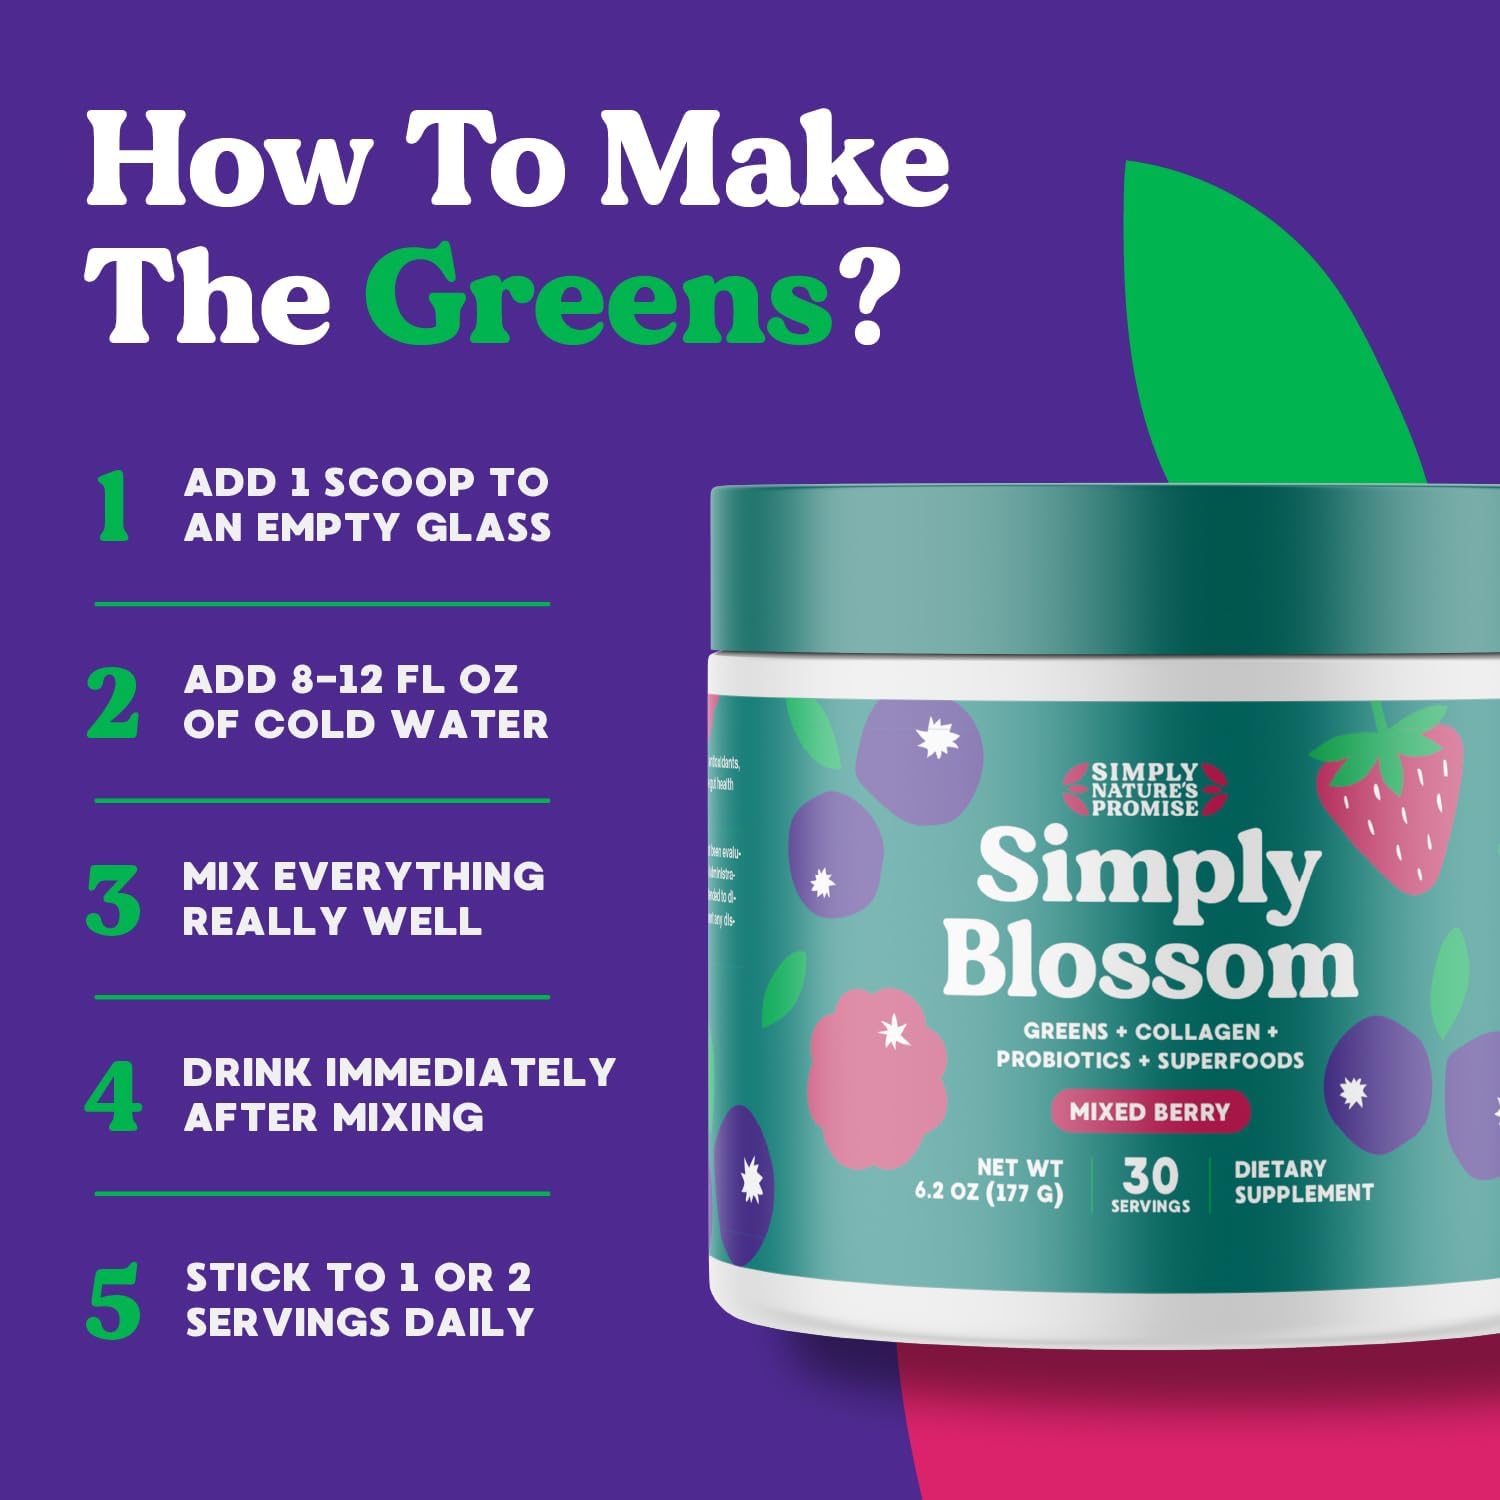 Simply Natures Promise Blossom Nutrition Daily Greens Superfood Powder + Collagen + Probiotics for Womens Digestive Health Bloating Relief. Help Your Health Bloom - 30 Day Supply